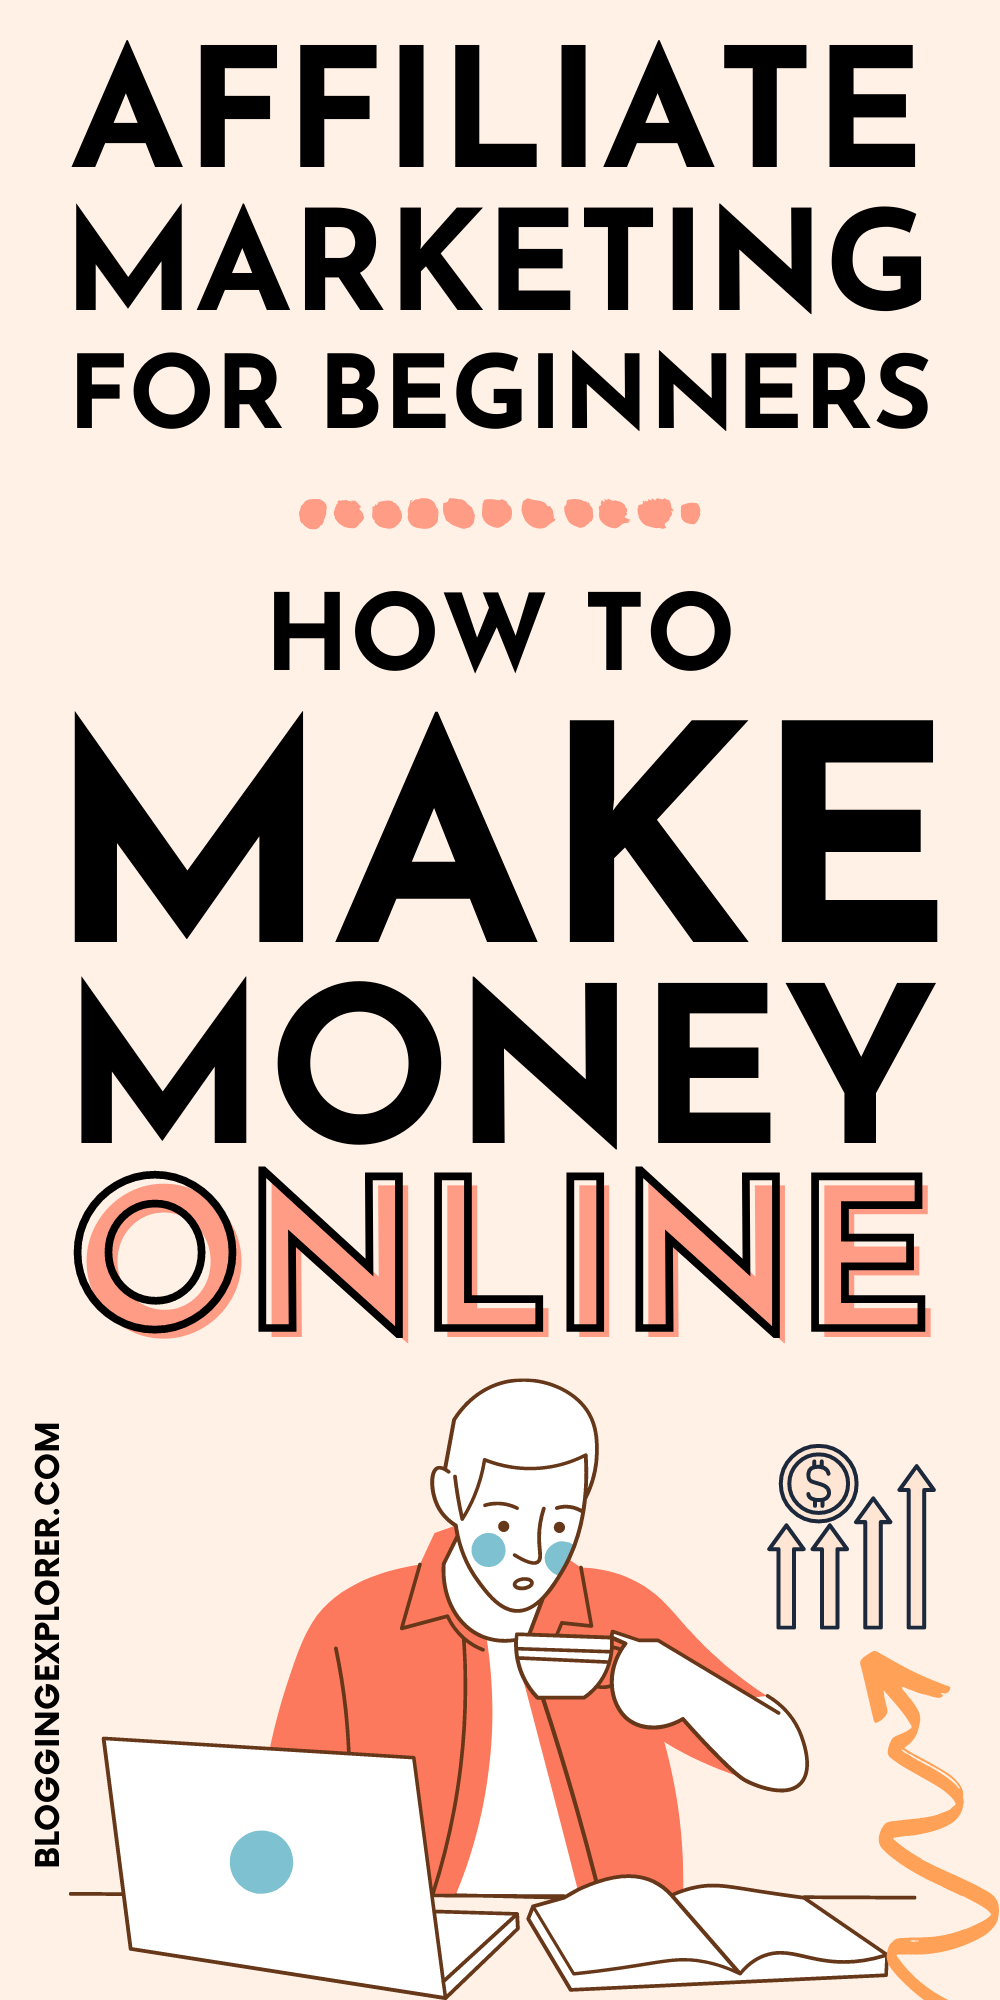 Affiliate marketing for beginners - How to make money online